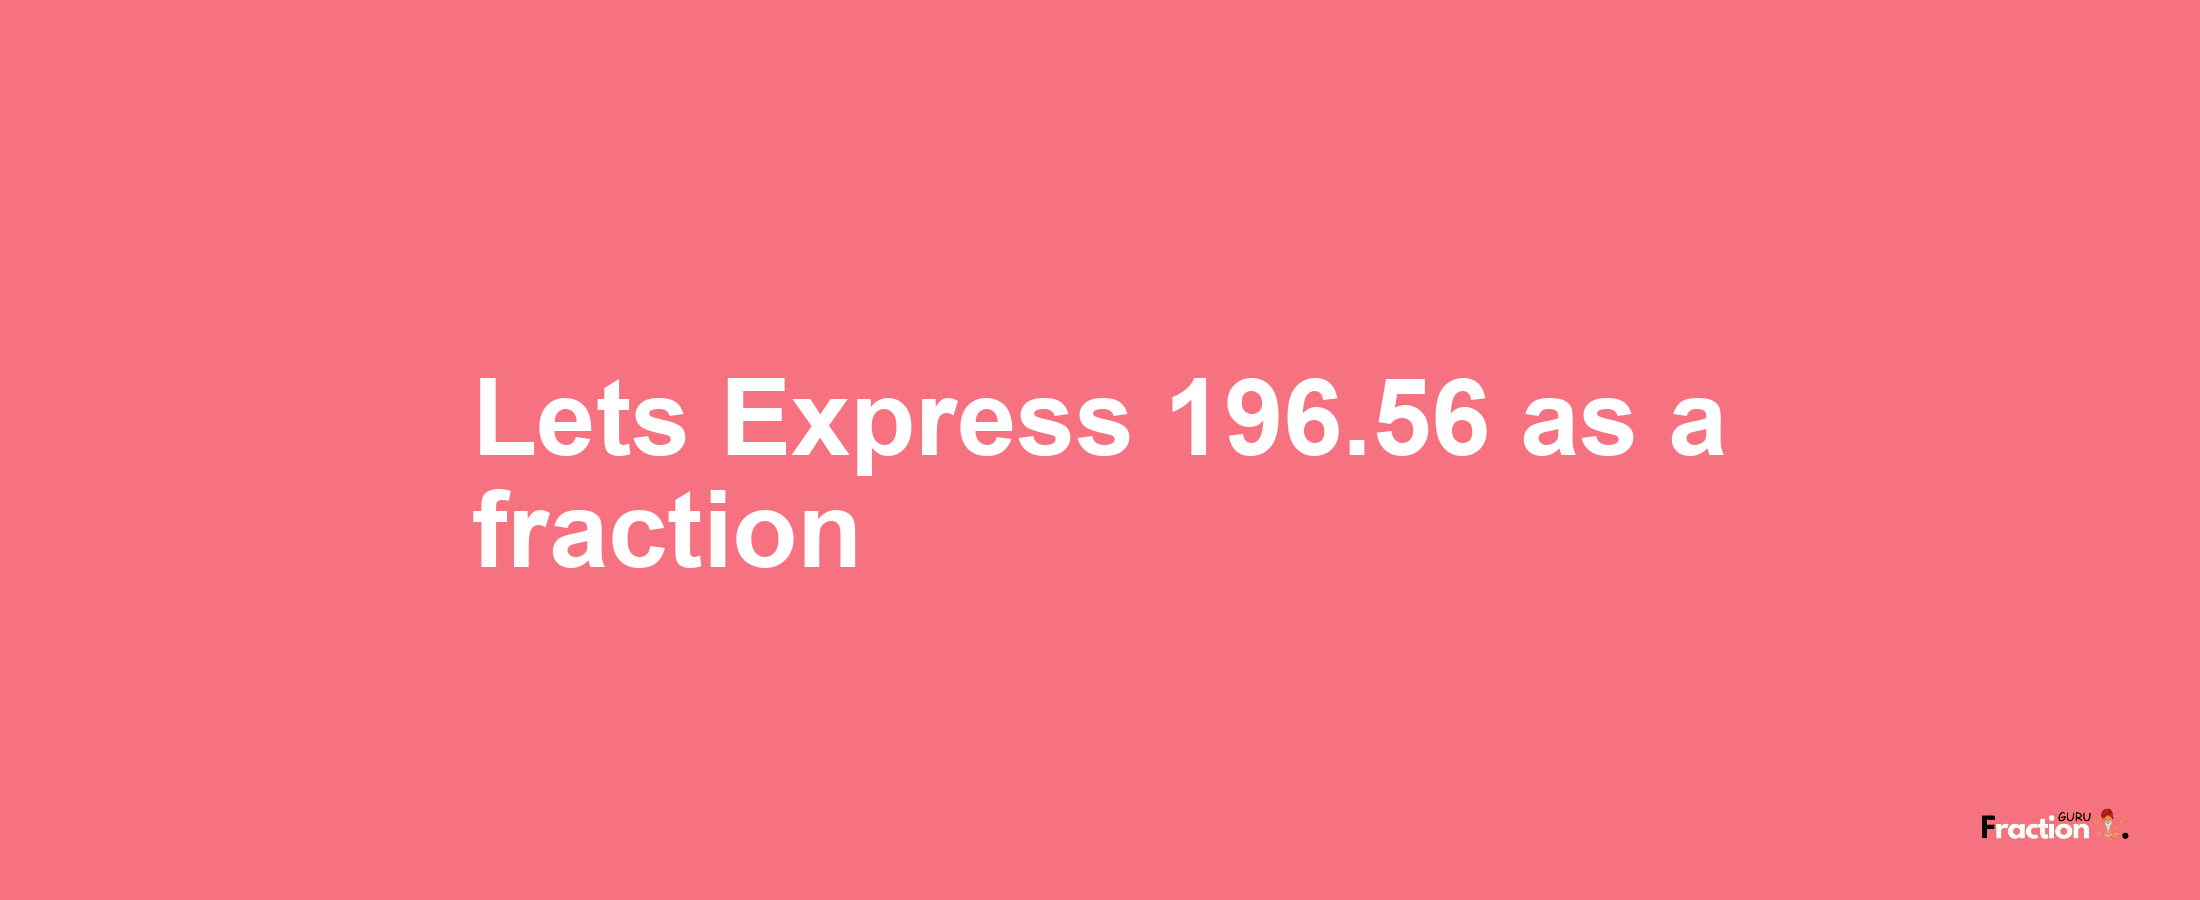 Lets Express 196.56 as afraction